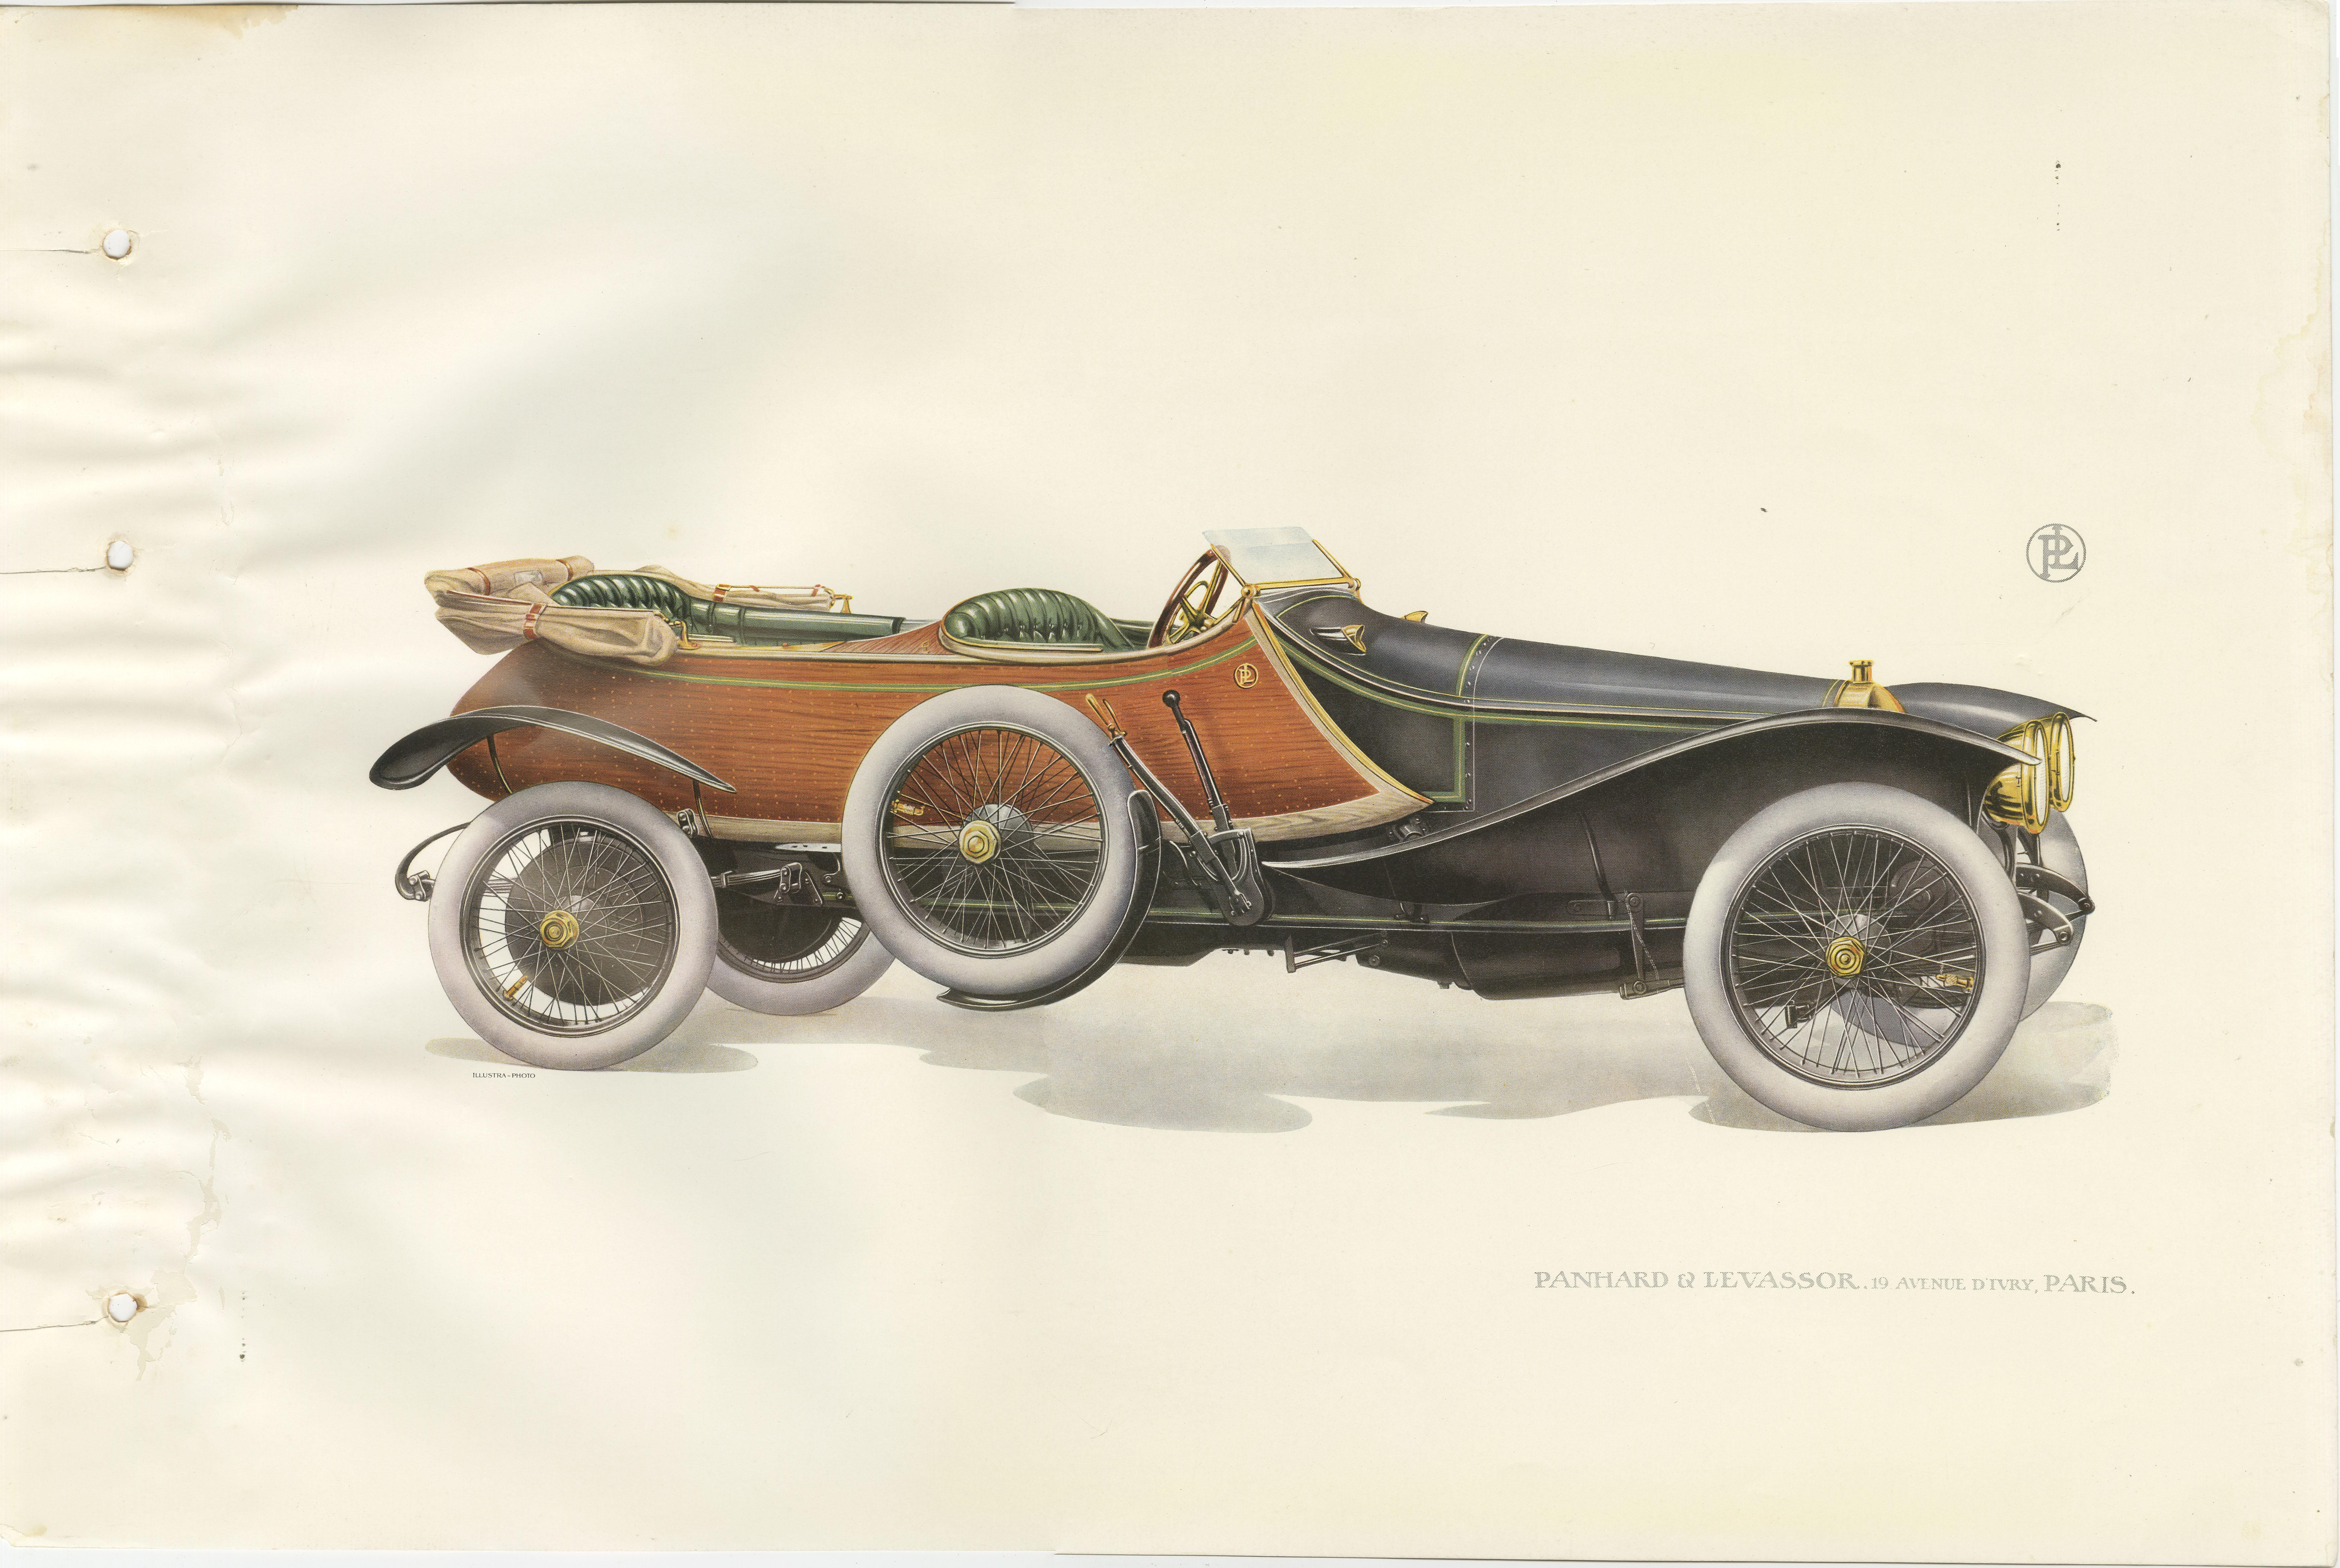 Antique print of a Panhard et Levassor Skiff-Torpedo car. This print originates from a rare catalog of the exclusive French brand Panhard & Levassor from 1914.

Panhard was a French motor vehicle manufacturer that began as one of the first makers